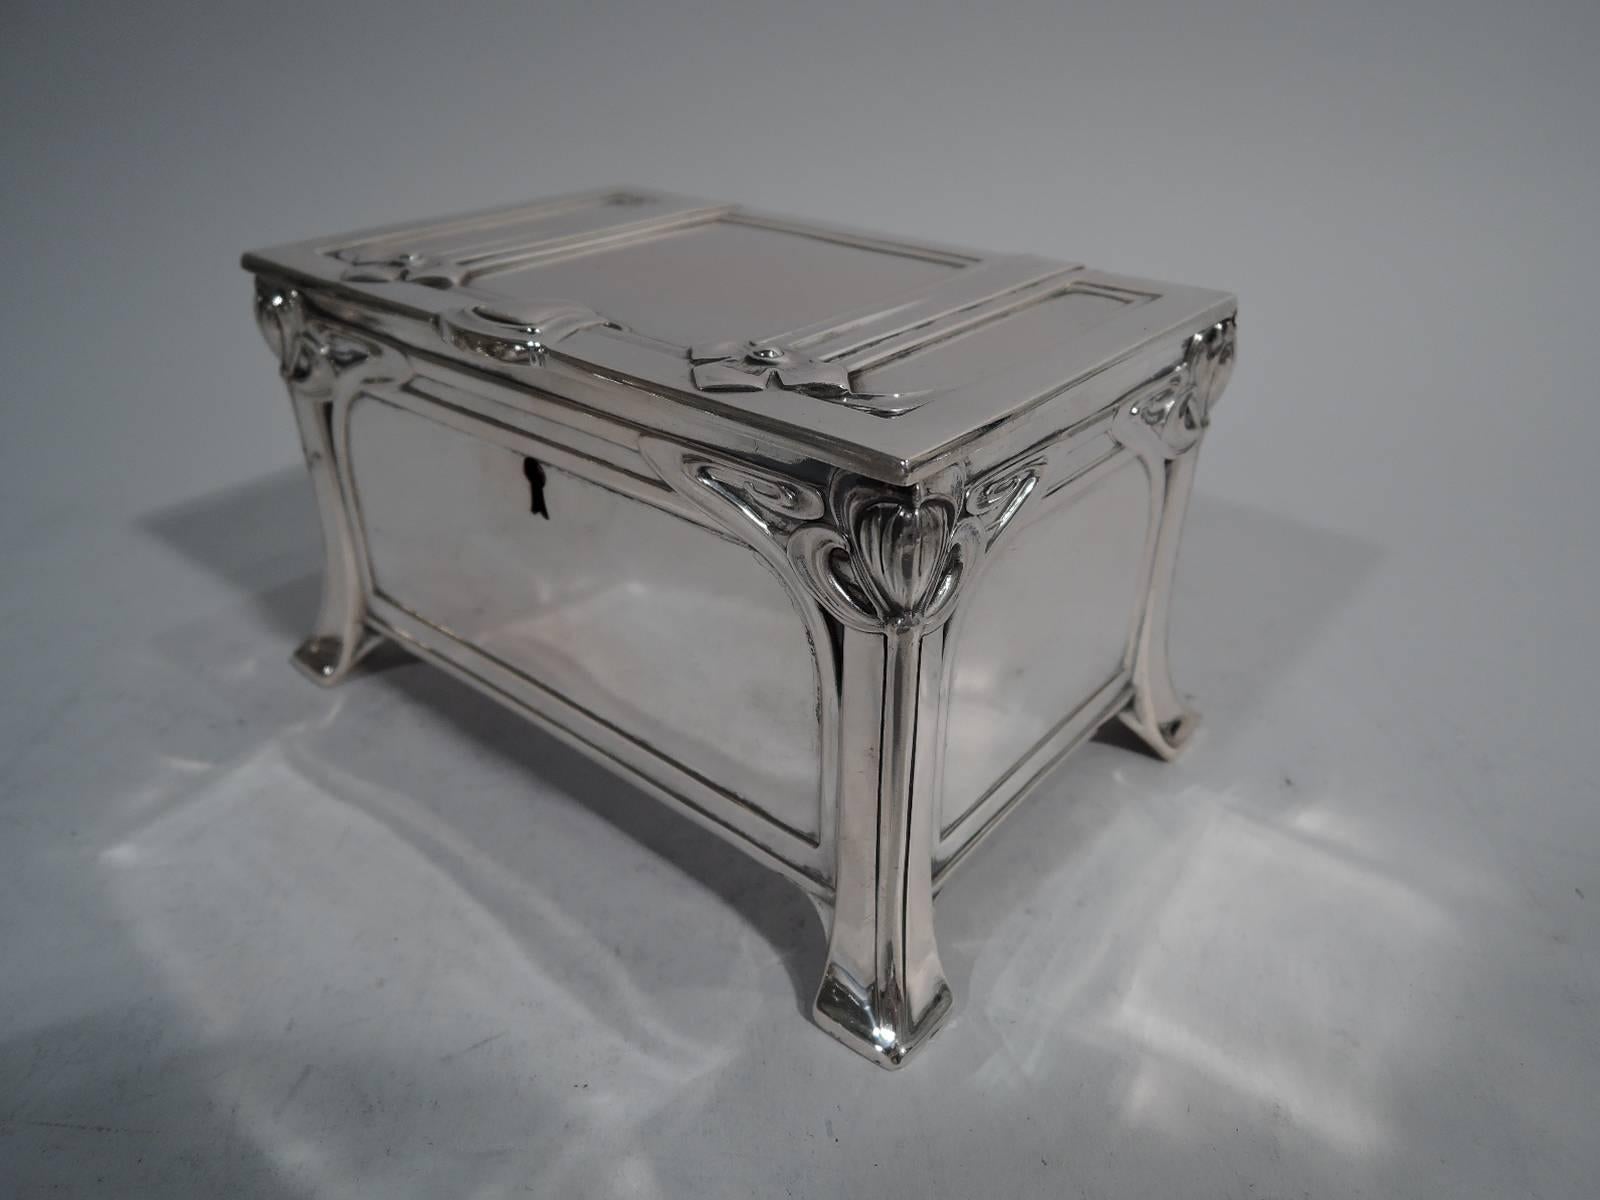 Austrian Jugendstil casket in 800 silver. Rectangular with straight sides, flat hinged cover, and splayed block supports. Sides and cover paneled. Ornament stylized and curvilinear. Sides have corner flowers between whiplash lines. Cover has straps